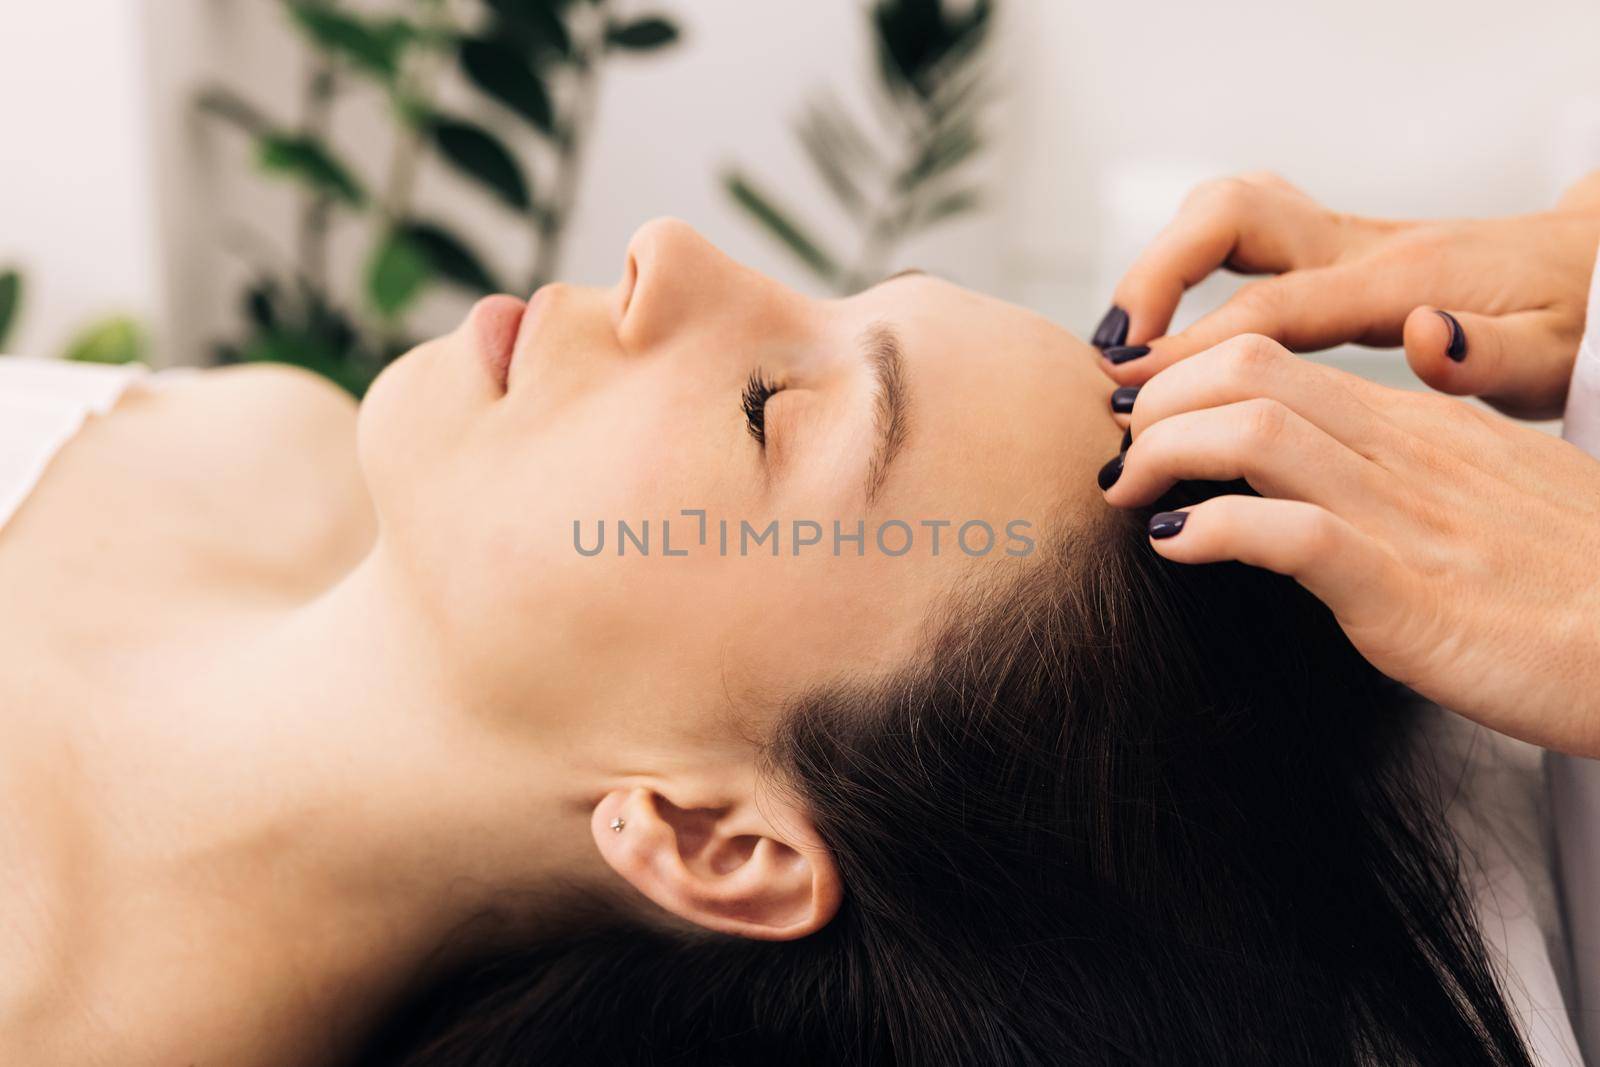 Close up of young girl receiving a facial massage and spa treatment for perfect skin in a luxury wellness center. Caucasian woman lying on spa bed get facial massage from massage therapist at clinic.